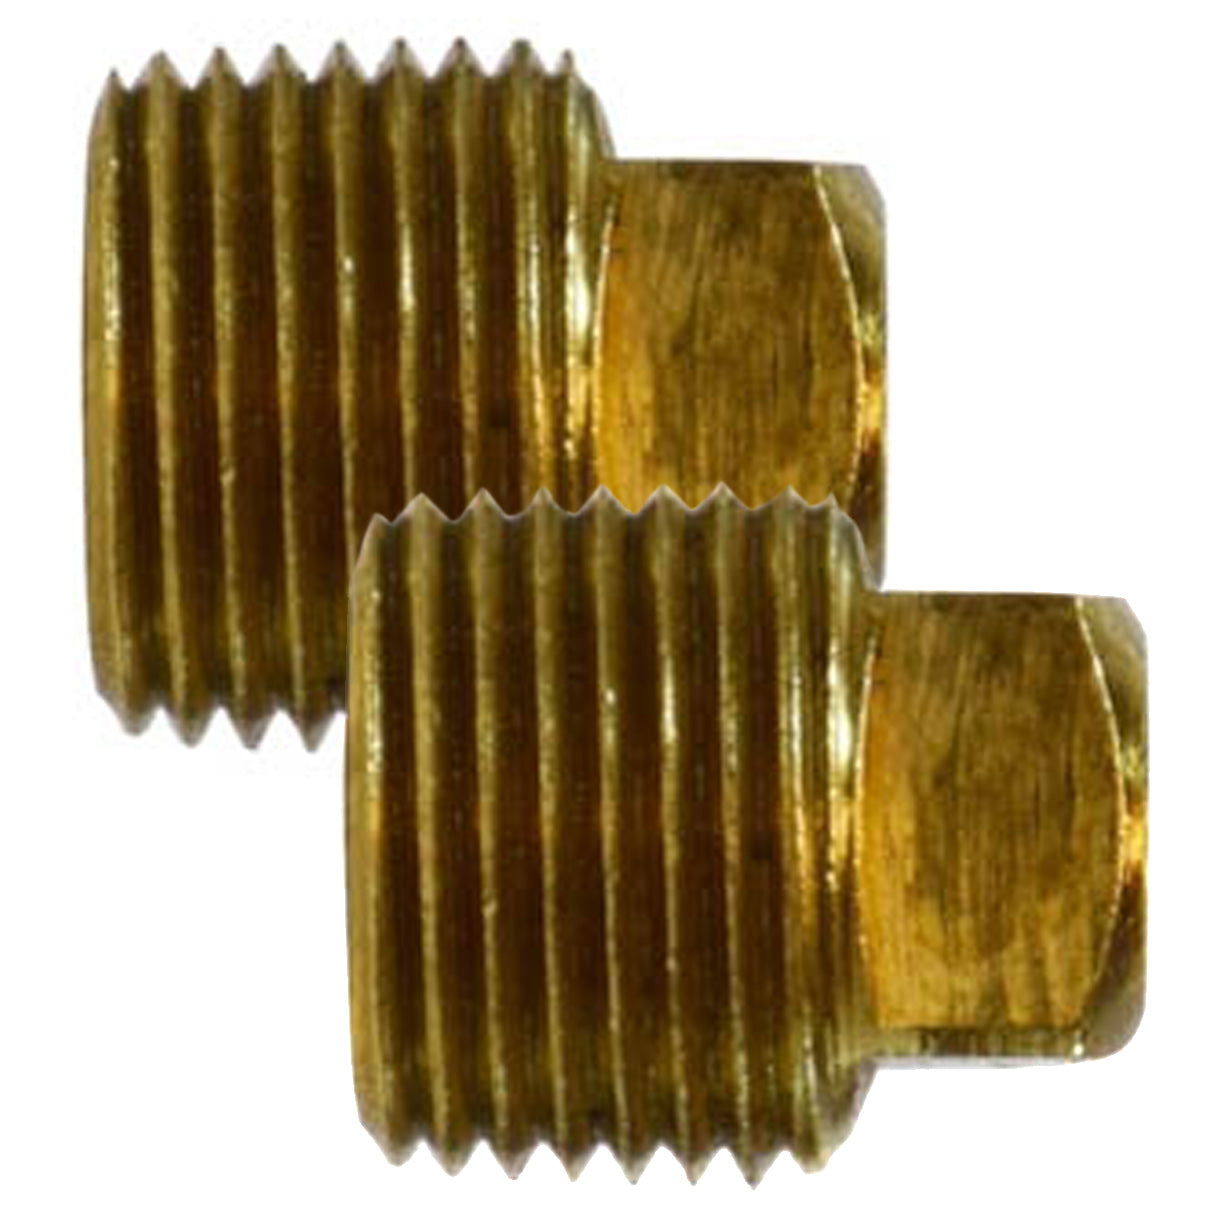 1/4" NPTF Square Head Barstock Plug Brass End Cap Pipe Fitting Brand New 2-Pack